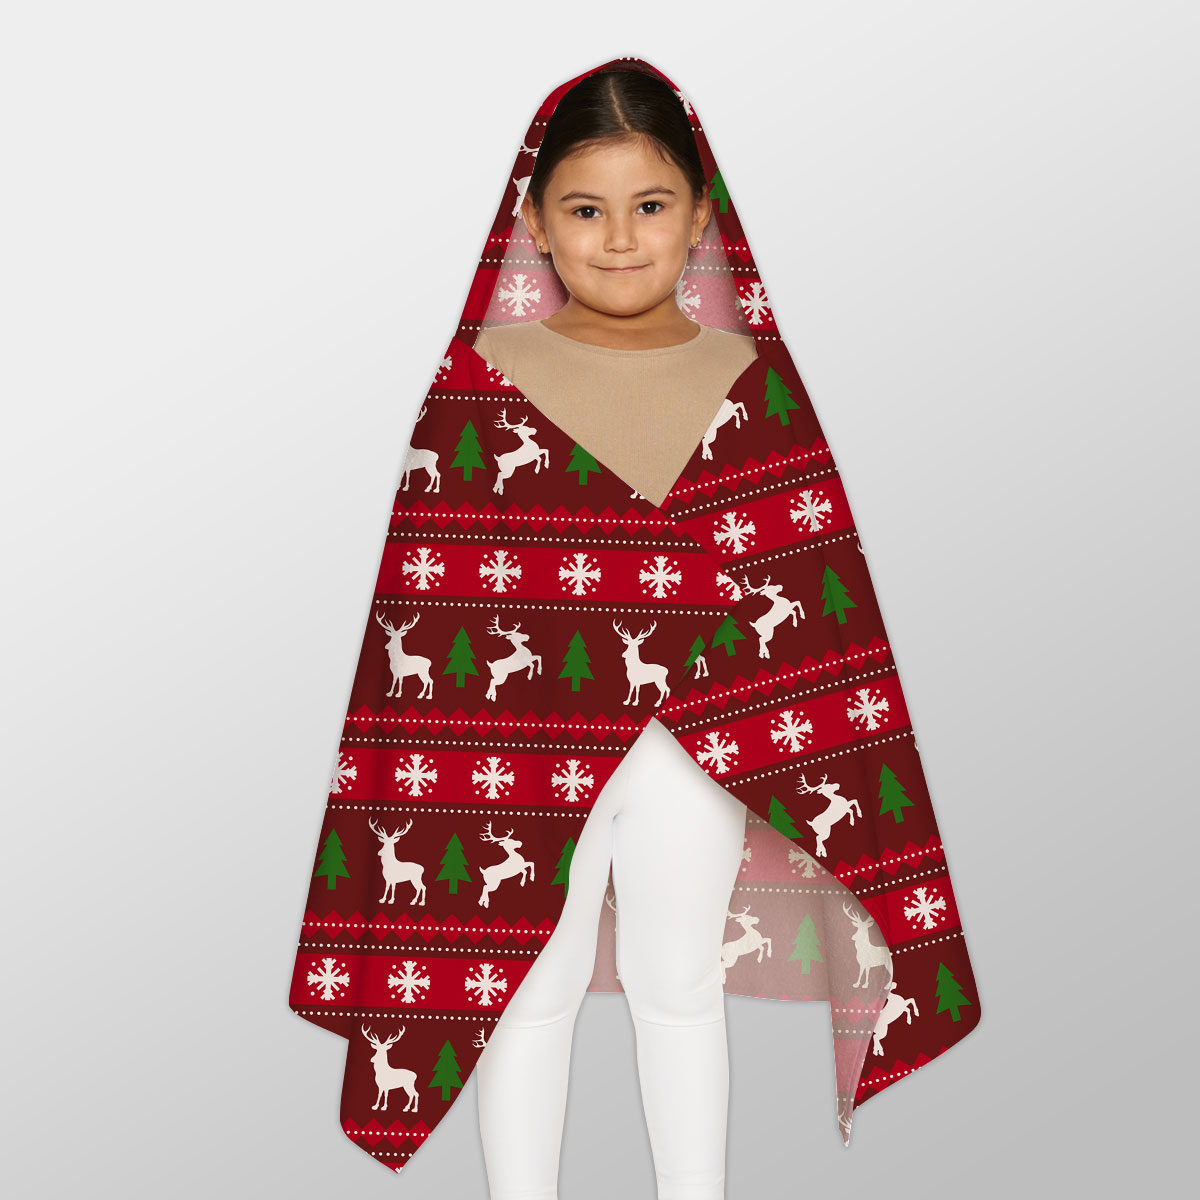 Red Green And White Christmas Tree, Reindeer With Snowflake Youth Hooded Towel